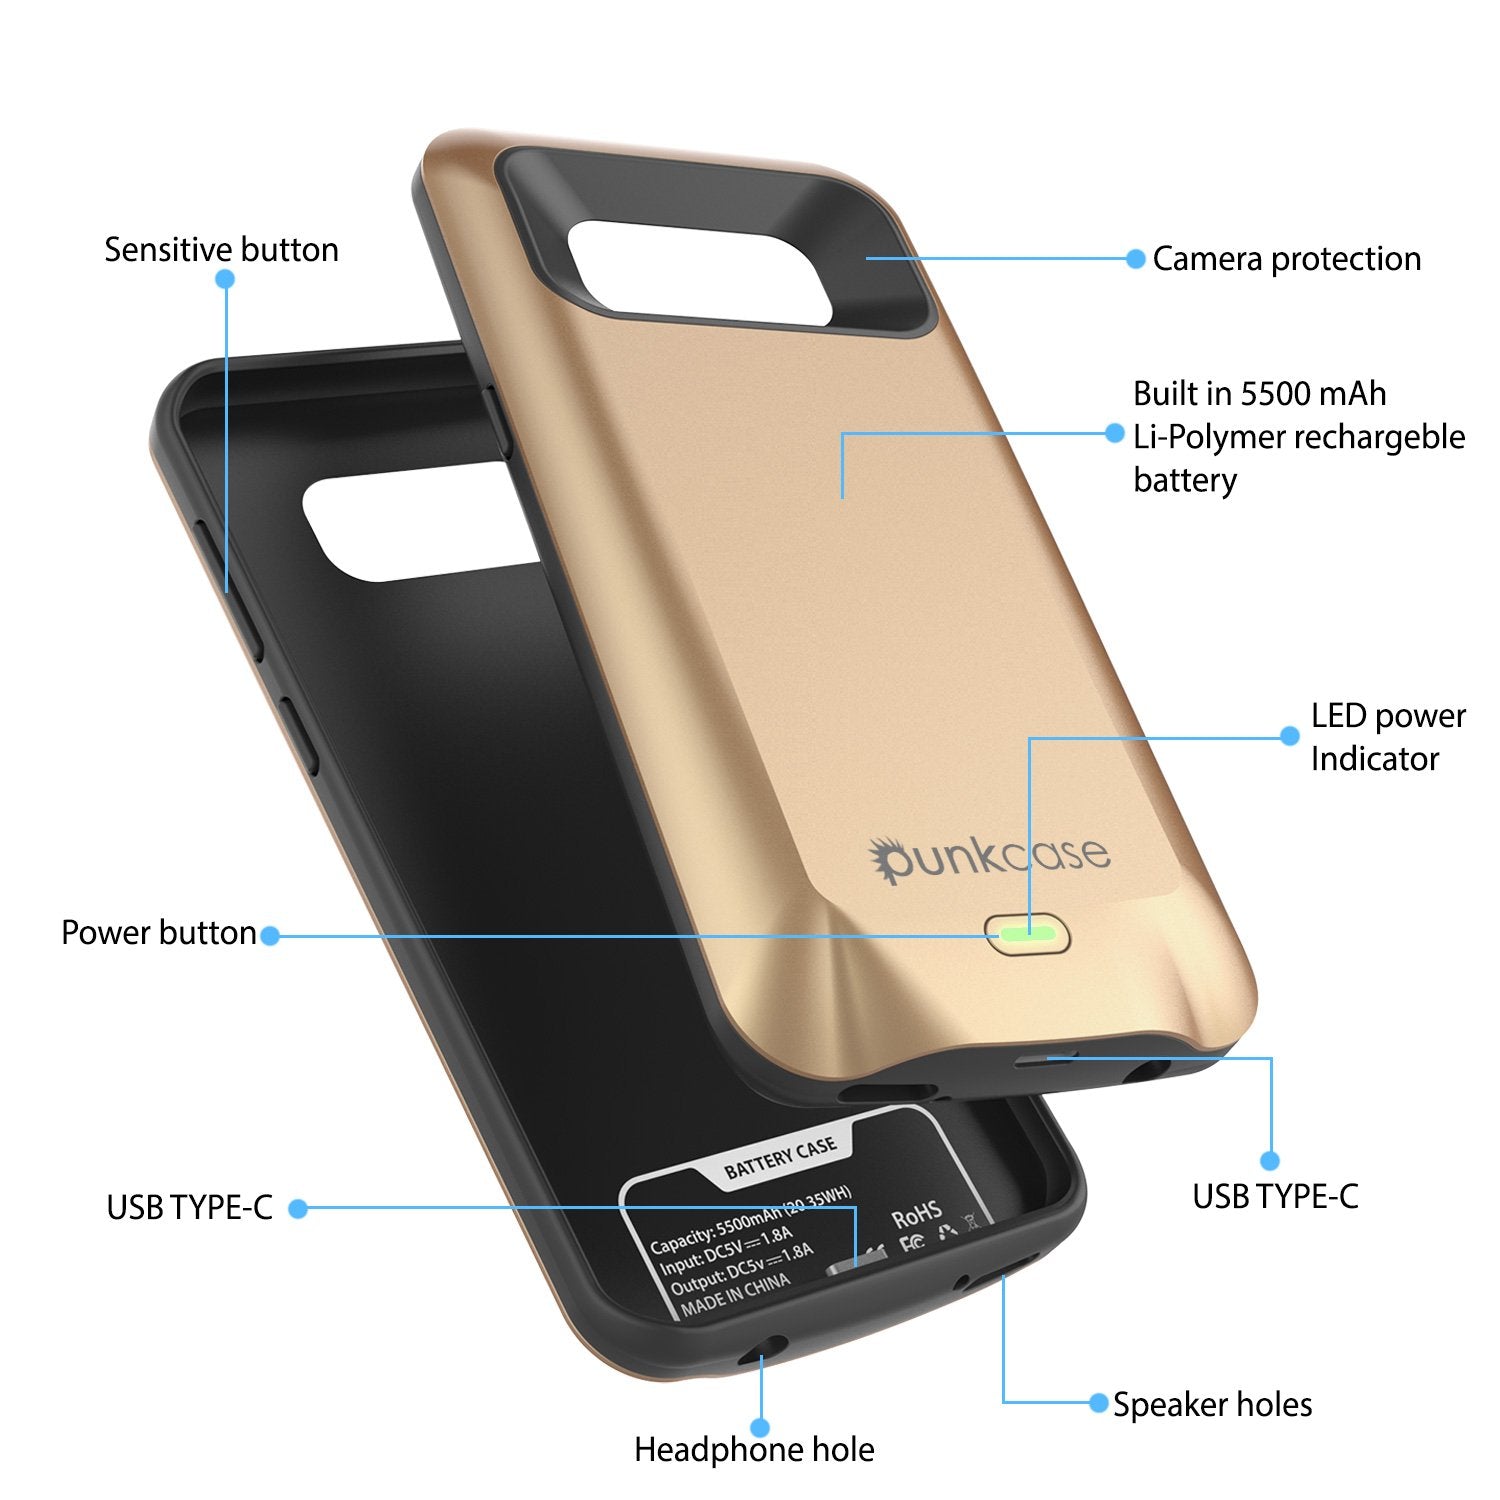 Galaxy S8 Plus Battery Case, 5500mAH Charger W/USB Port Case [Gold]